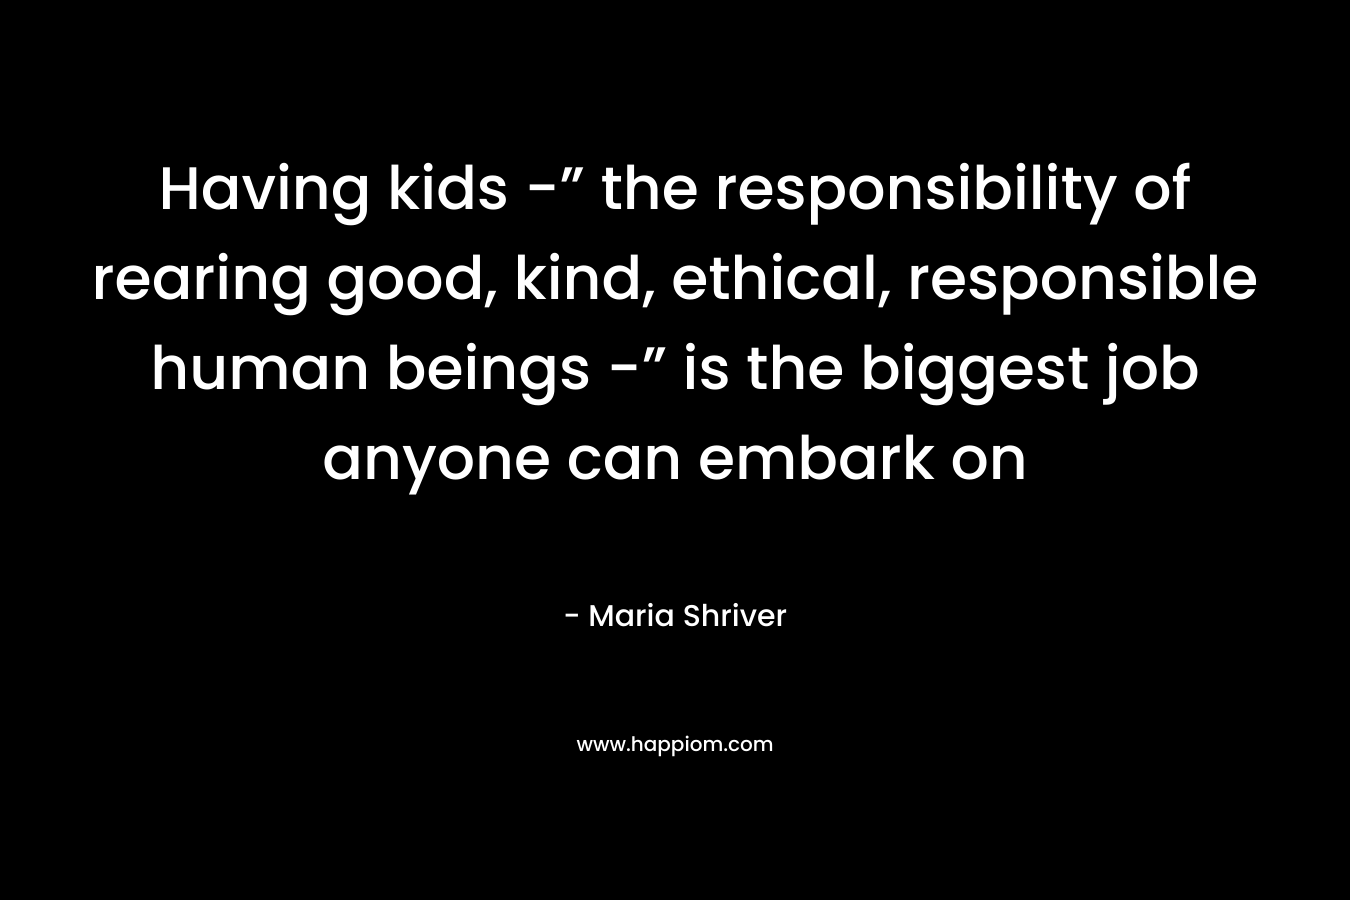 Having kids -” the responsibility of rearing good, kind, ethical, responsible human beings -” is the biggest job anyone can embark on – Maria Shriver